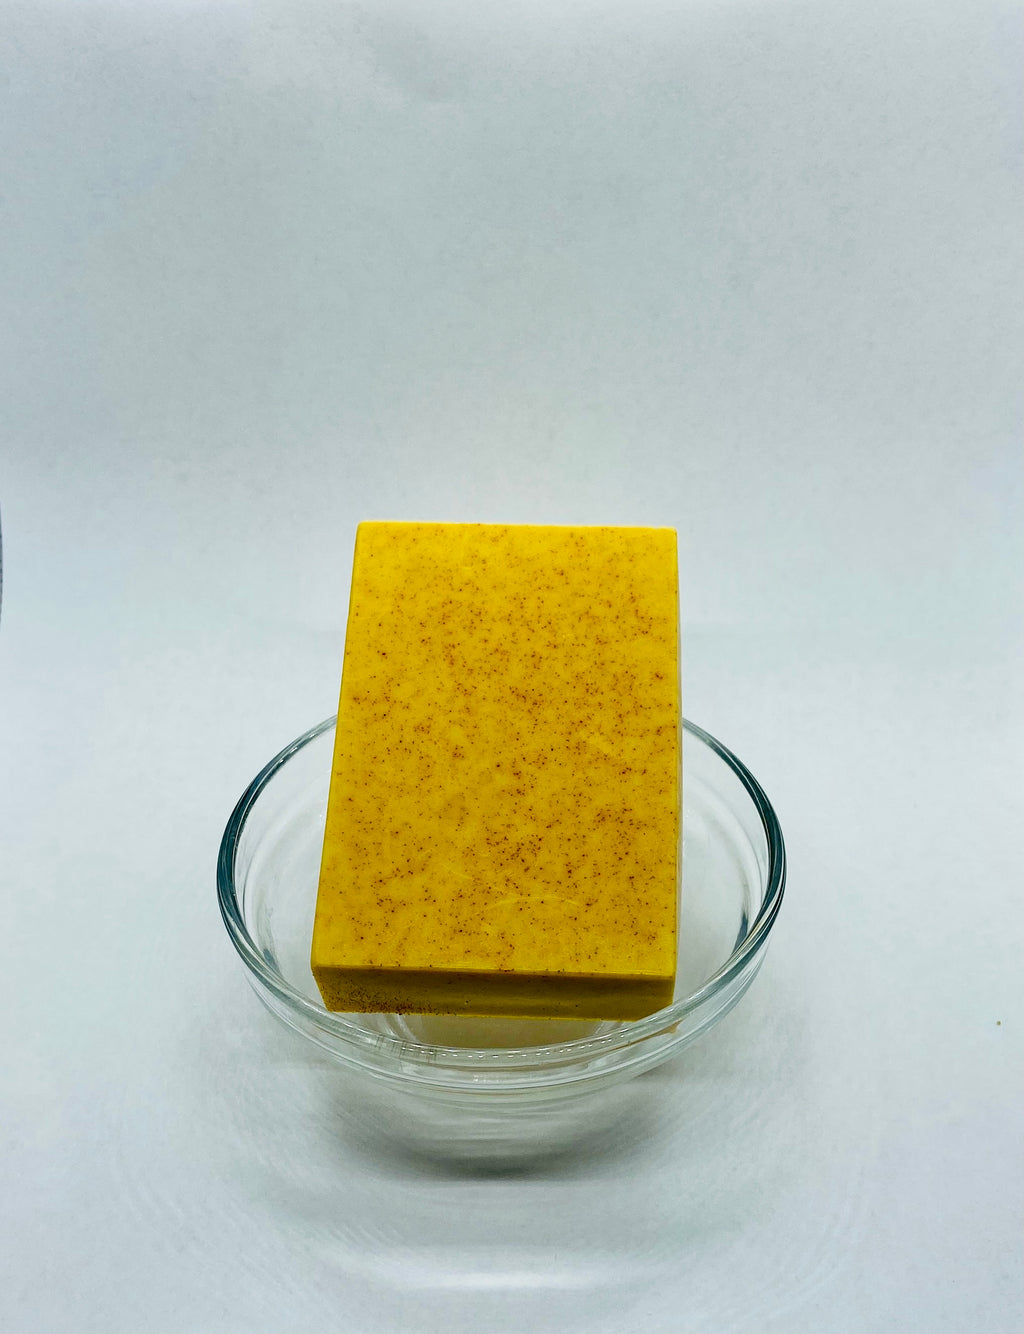 Our Turmeric Milk Body Bar has anti-inflammatory, antibacterial and healing benefits due to its high concentrations of fatty acids and vitamins. Turmeric can work wonders on the skin including redness and blemish reduction and calming rosacea and eczema skin conditions. Turmeric is great for acne due to its natural antiseptic properties that help keep bacteria from spreading. 